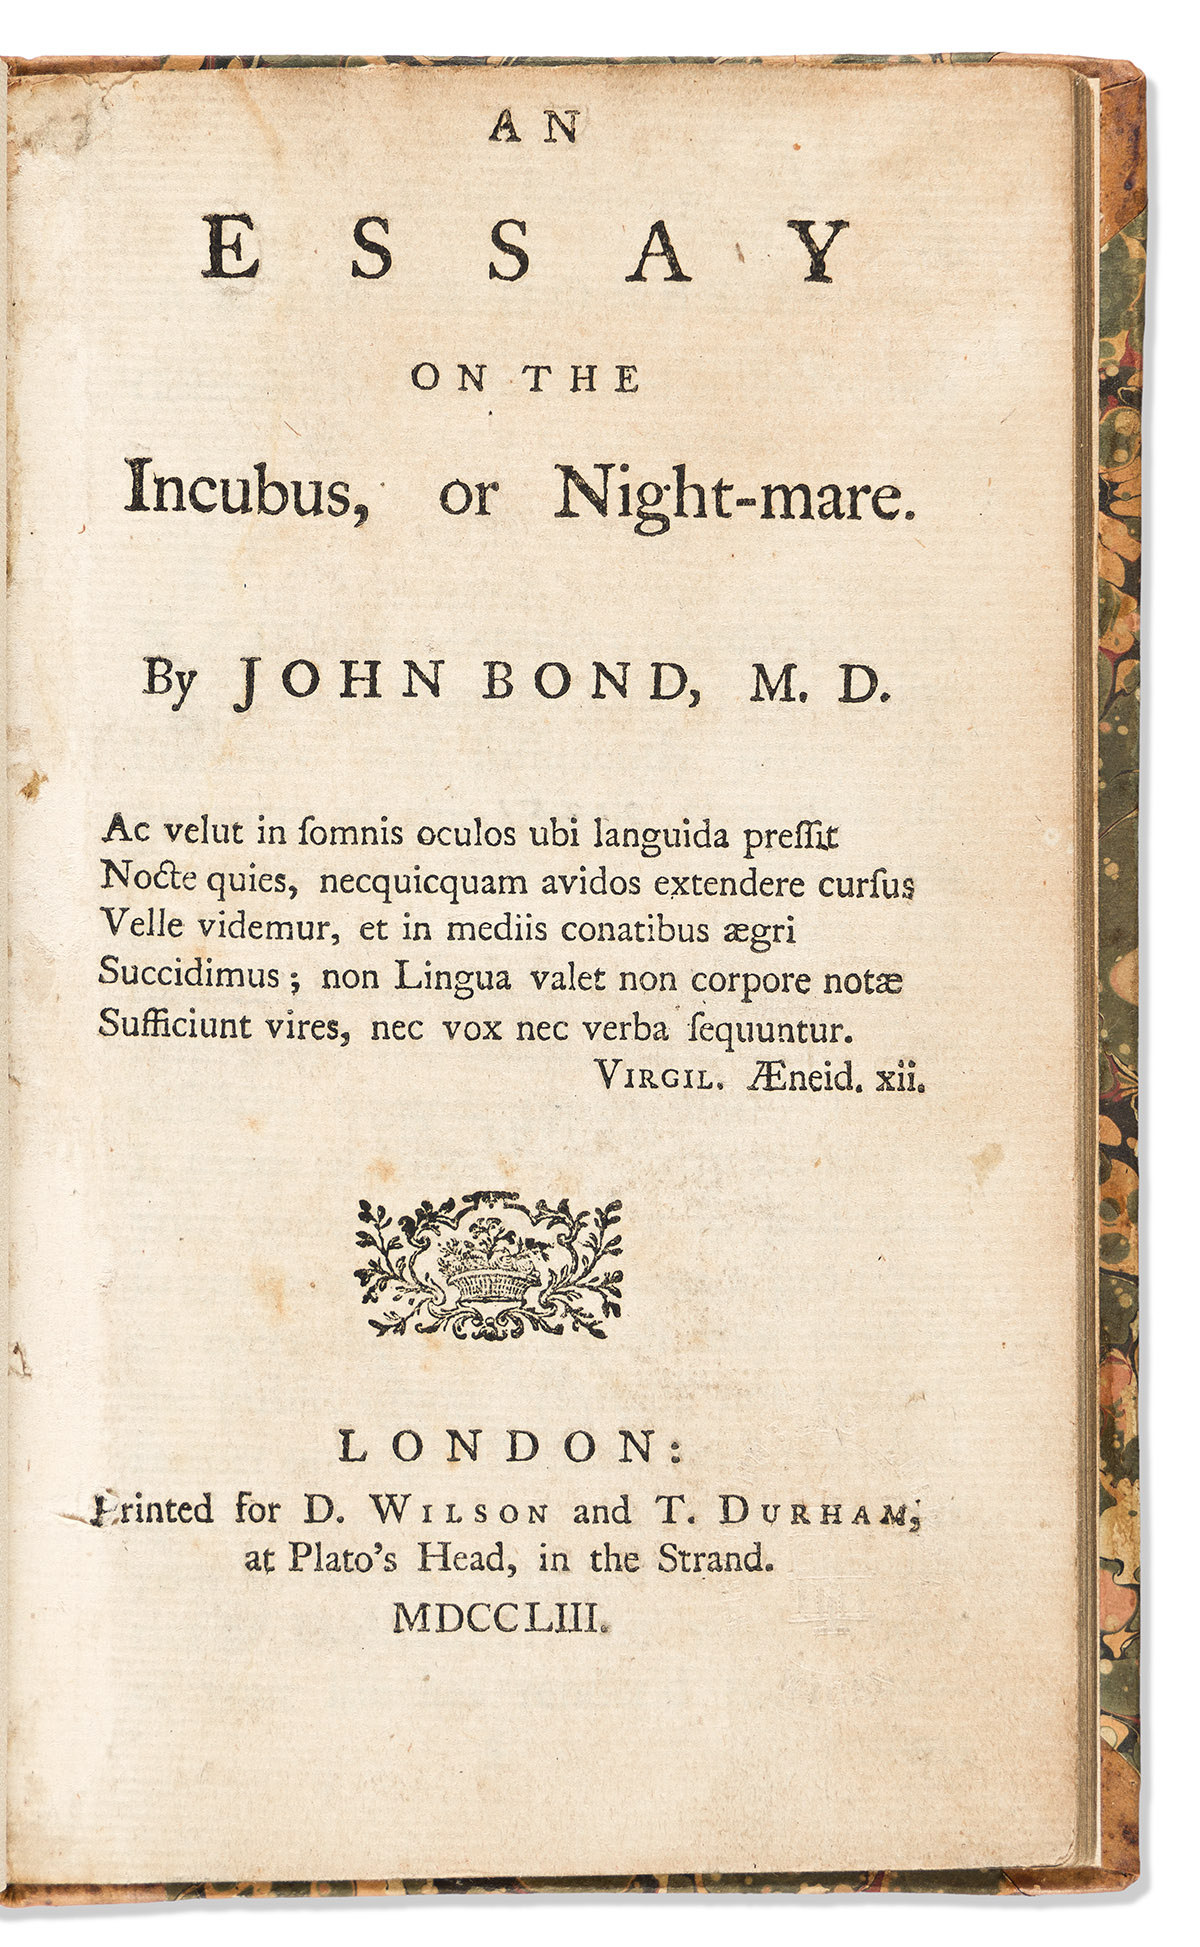 Bond, John, M.D. An Essay on the Incubus, or the Night-mare.